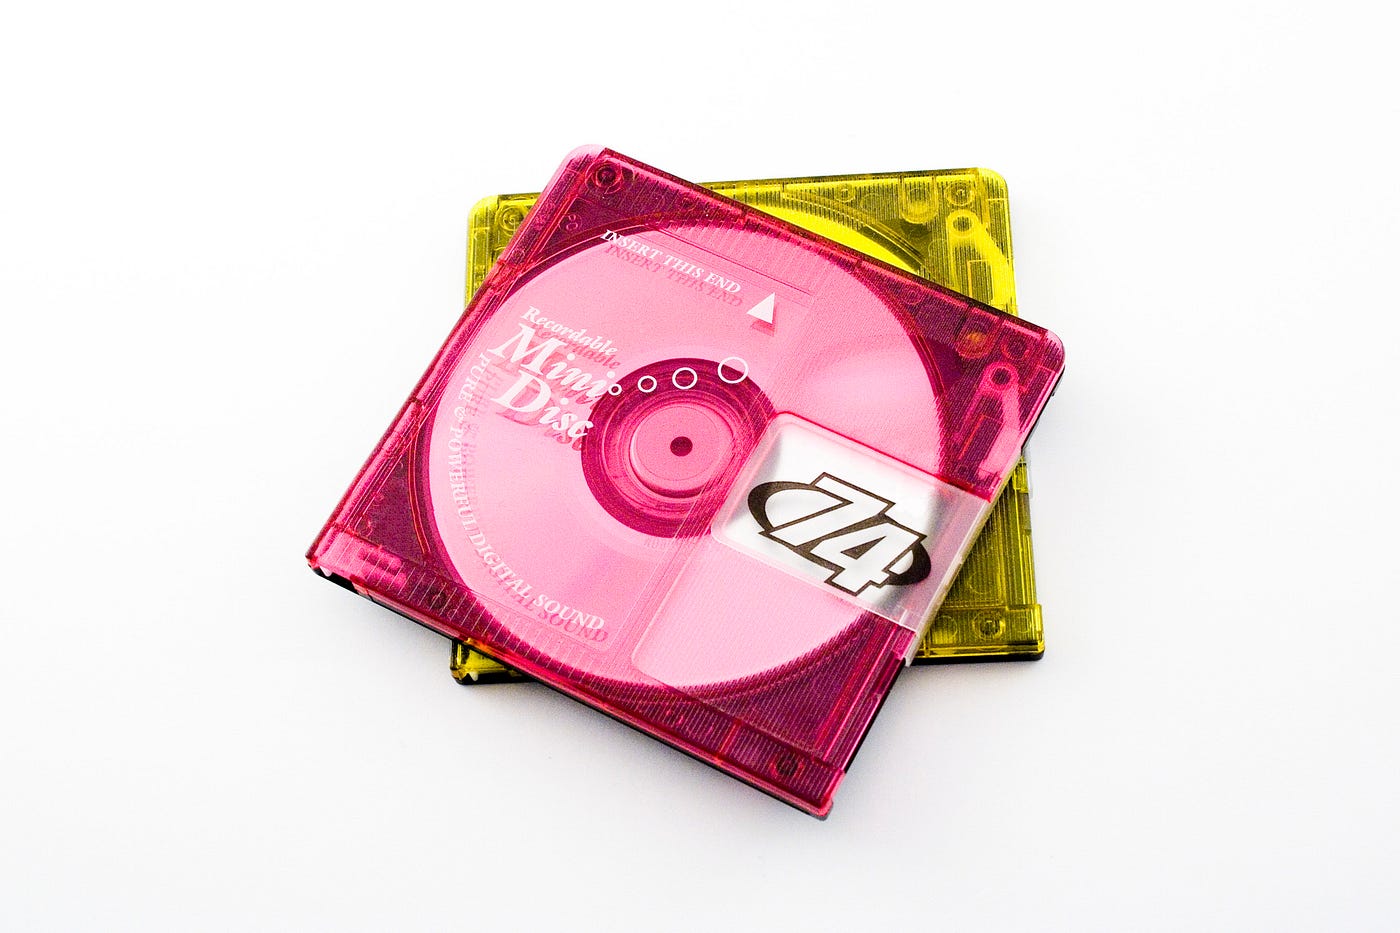 The MiniDisc: the failure of a forgotten format